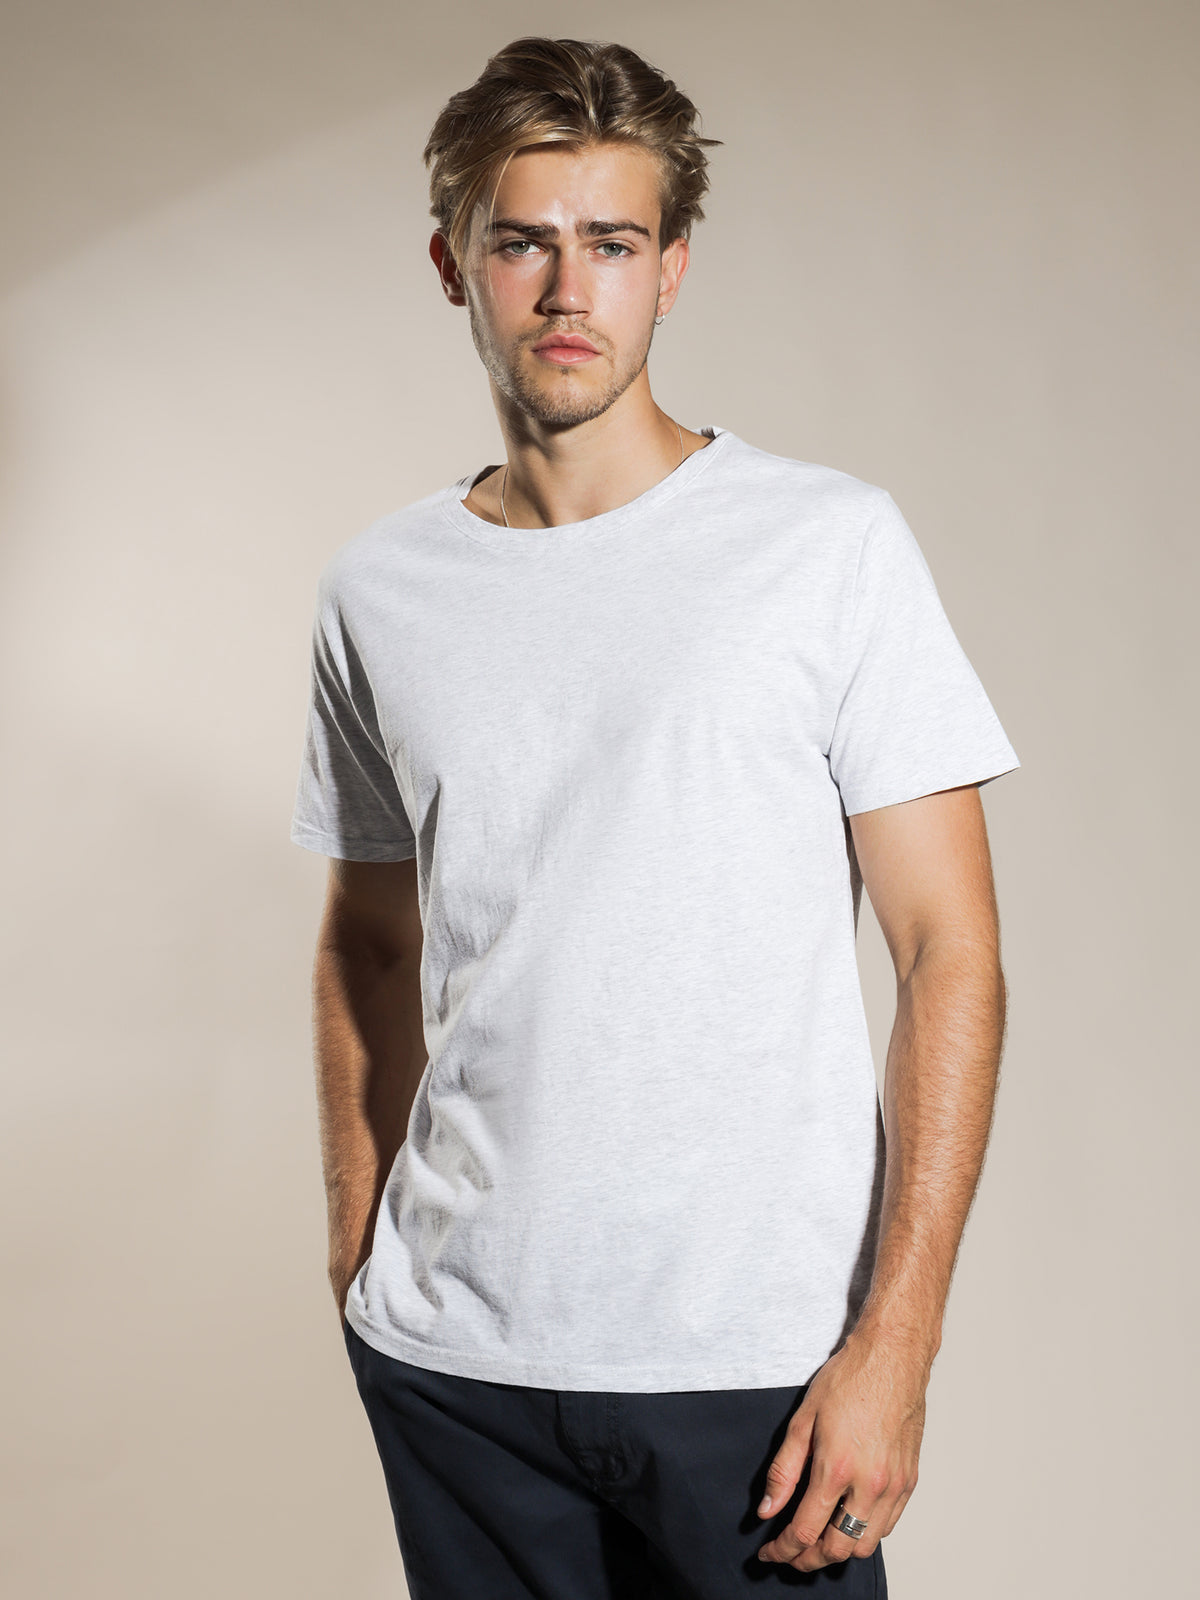 Basic Crew T-Shirt in Snow Marle